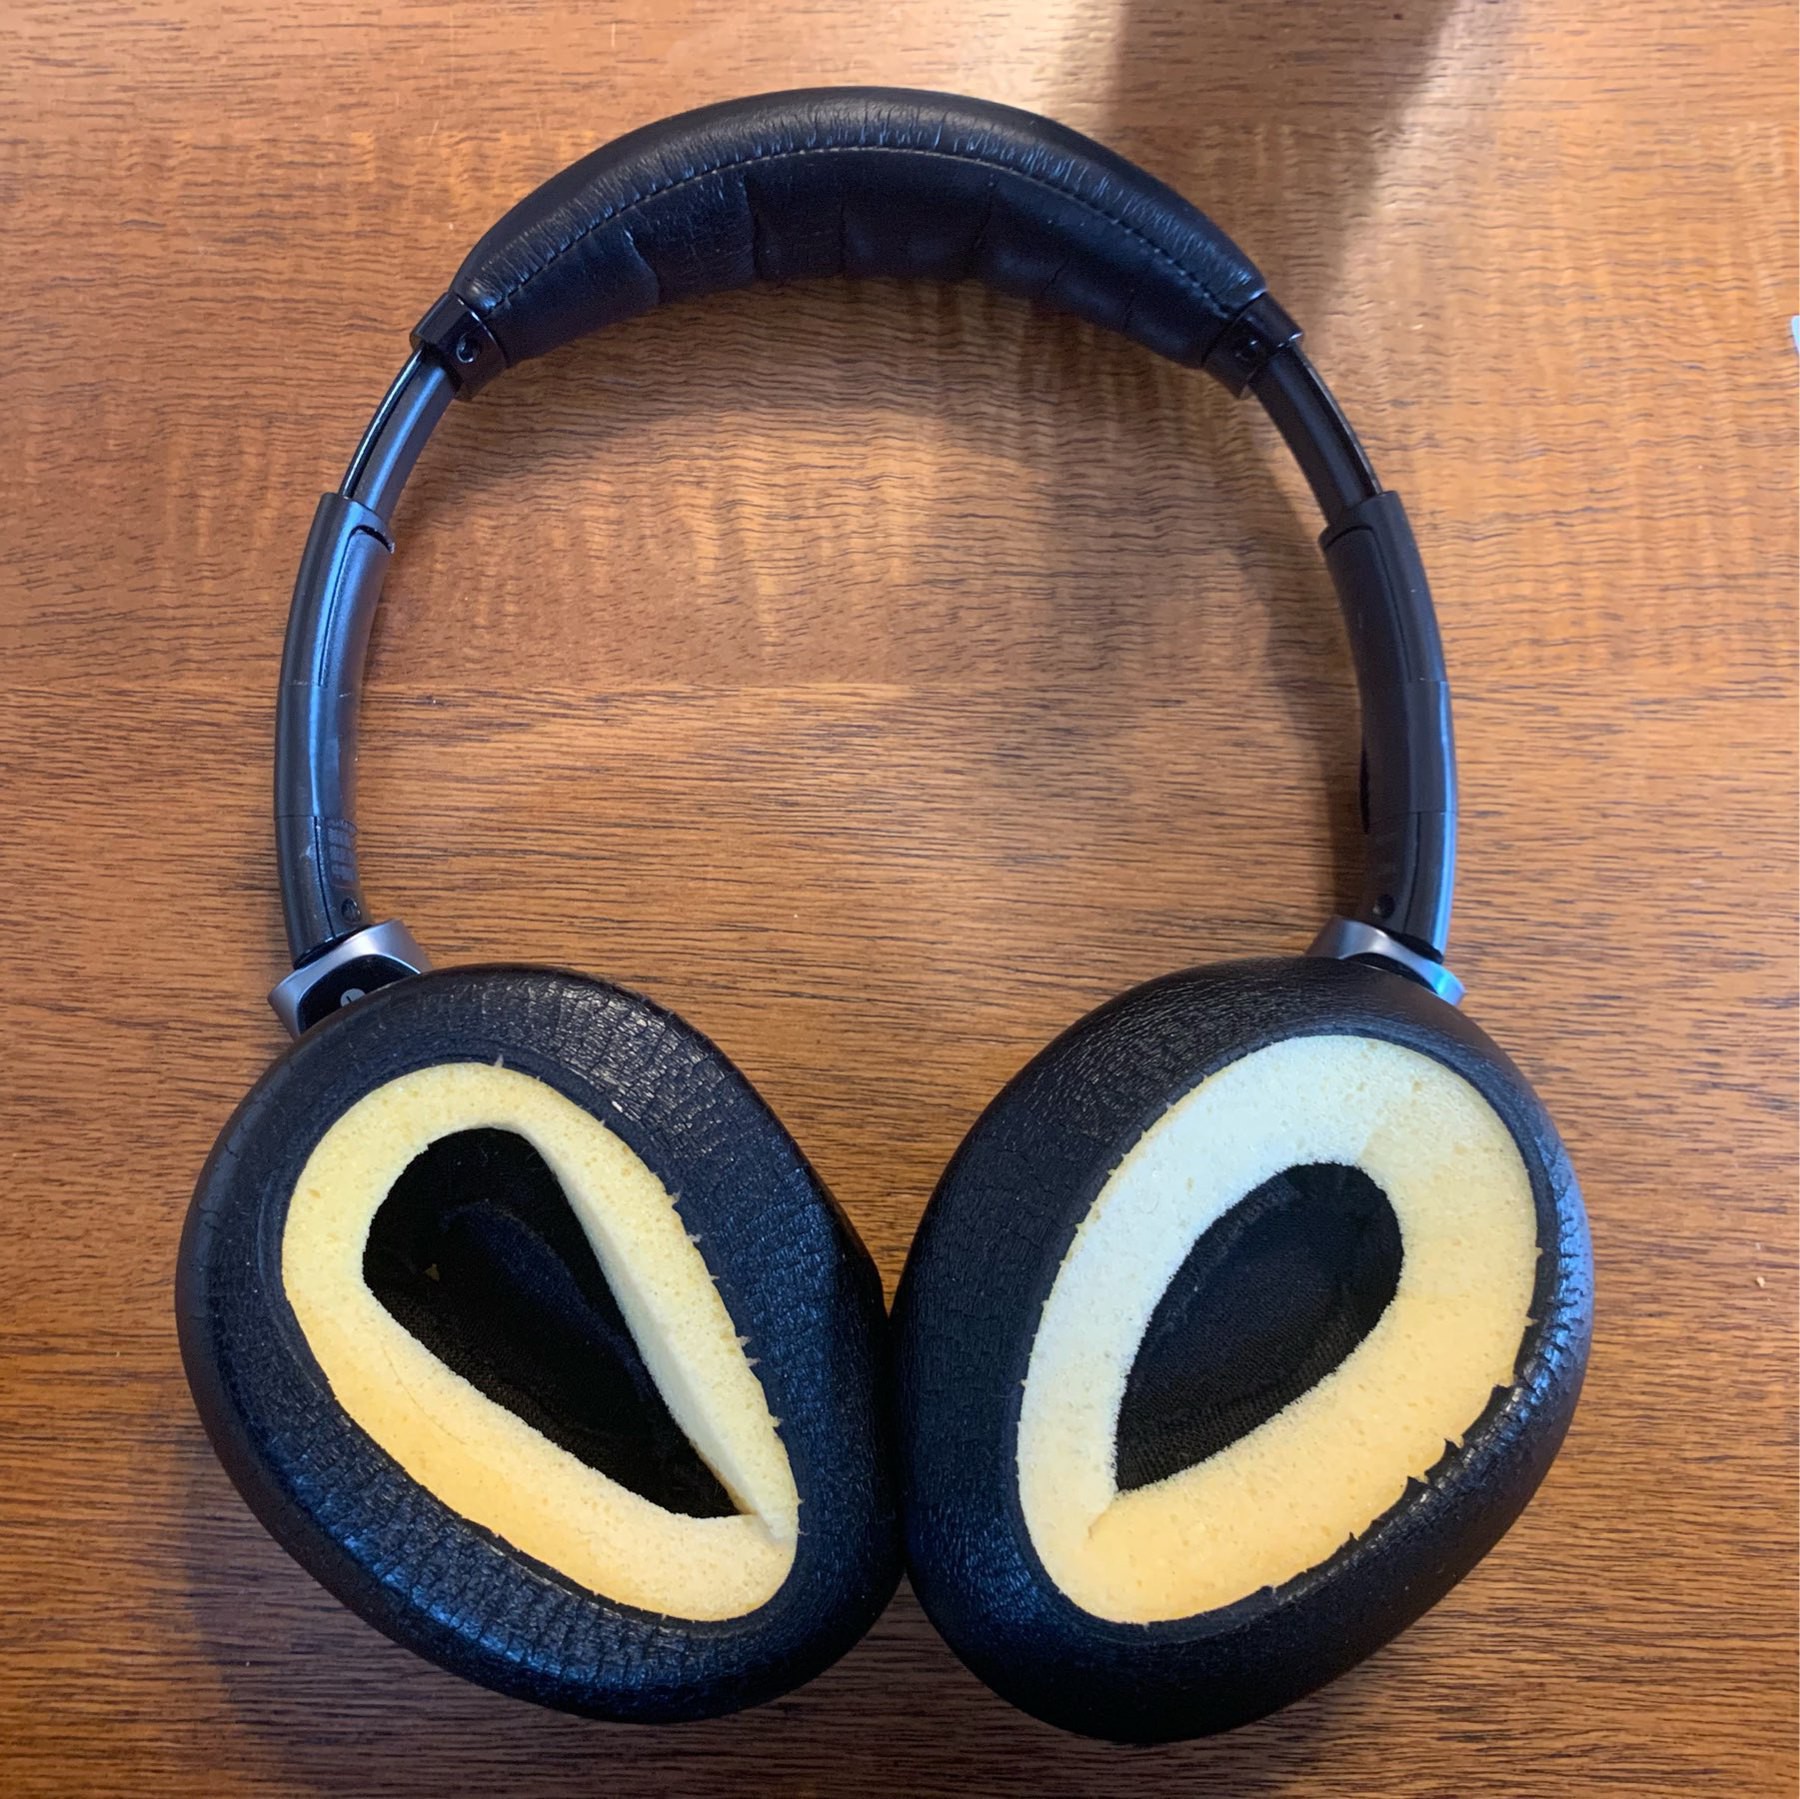 My headphones with the ear pads blown out. Like a yellow foam explosion. 